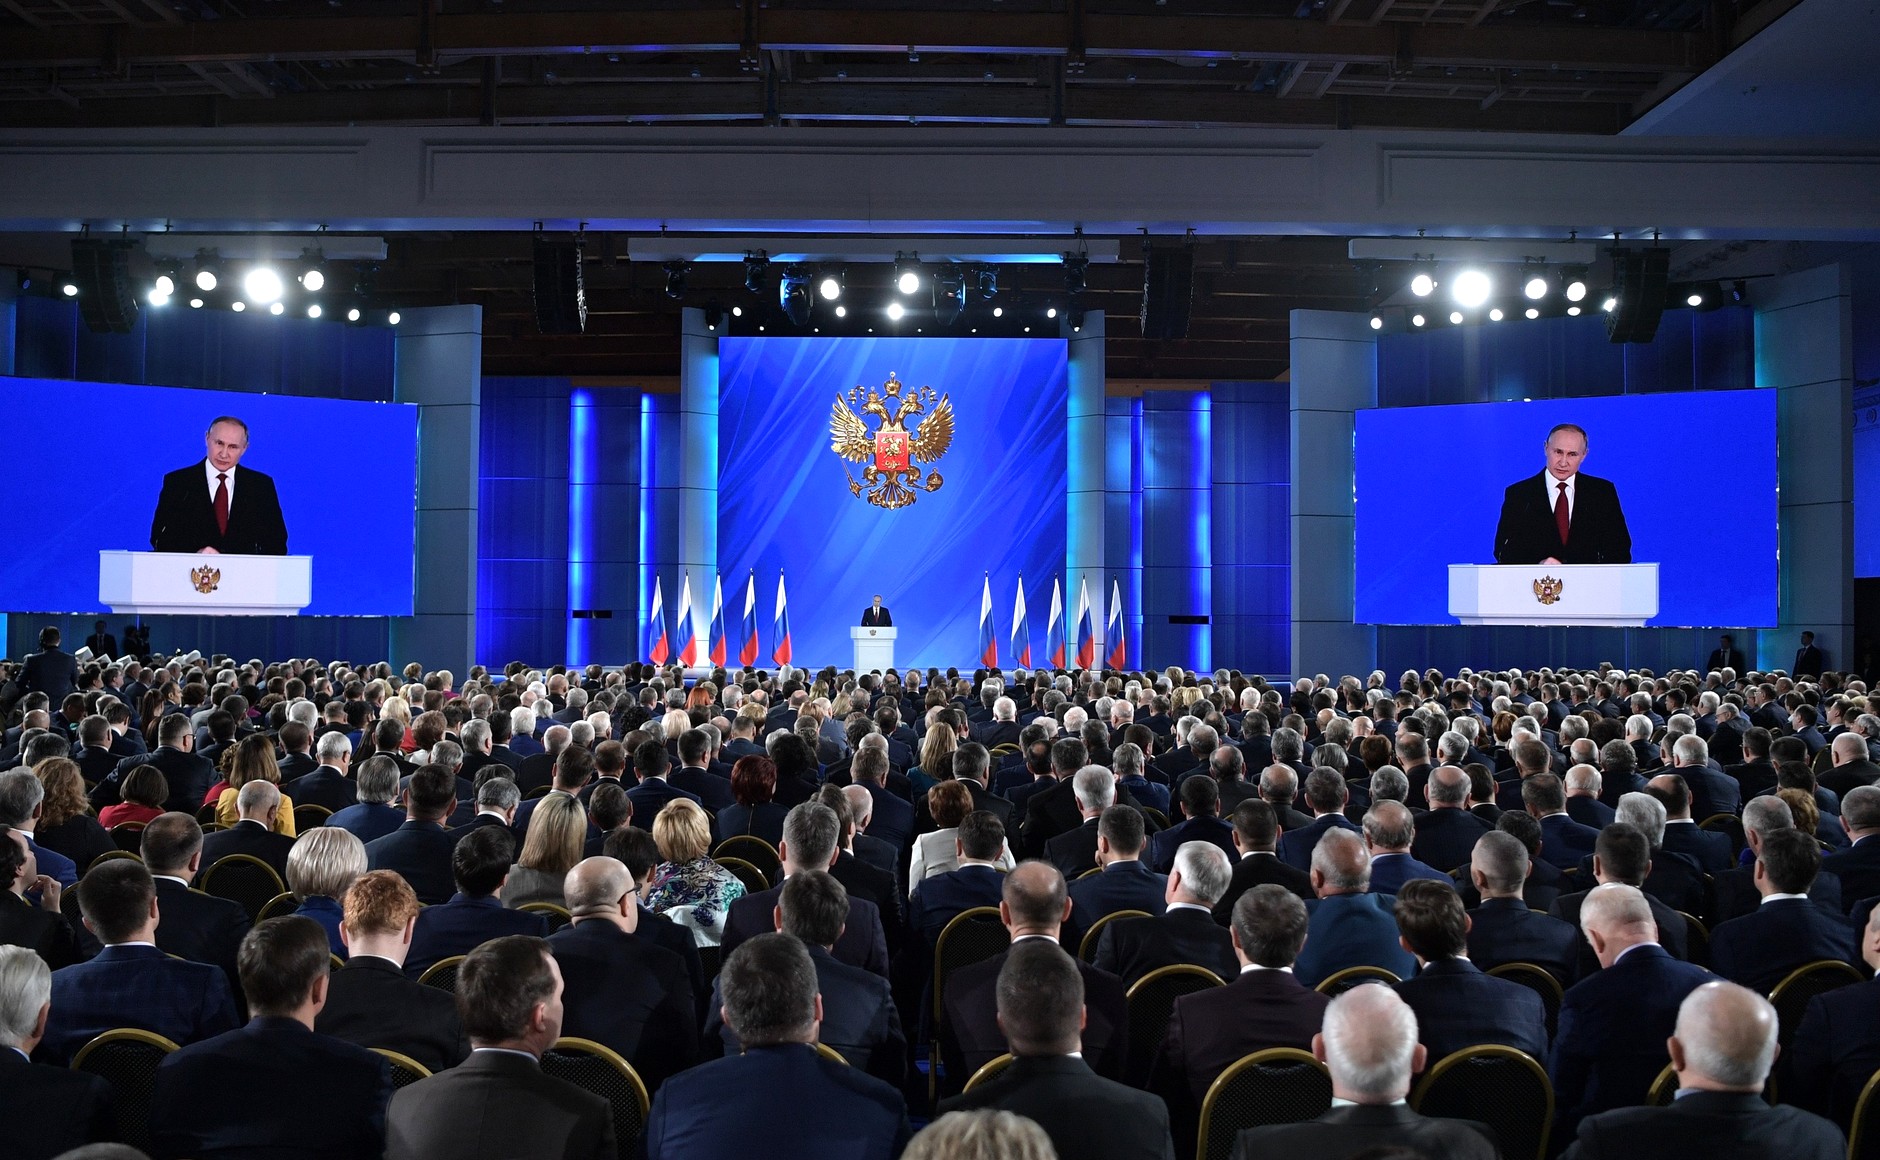 Vladimir Putin's address to the Federal Assembly of Russia on January 15, 2020 in Moscow. (Photo: kremlin.ru)